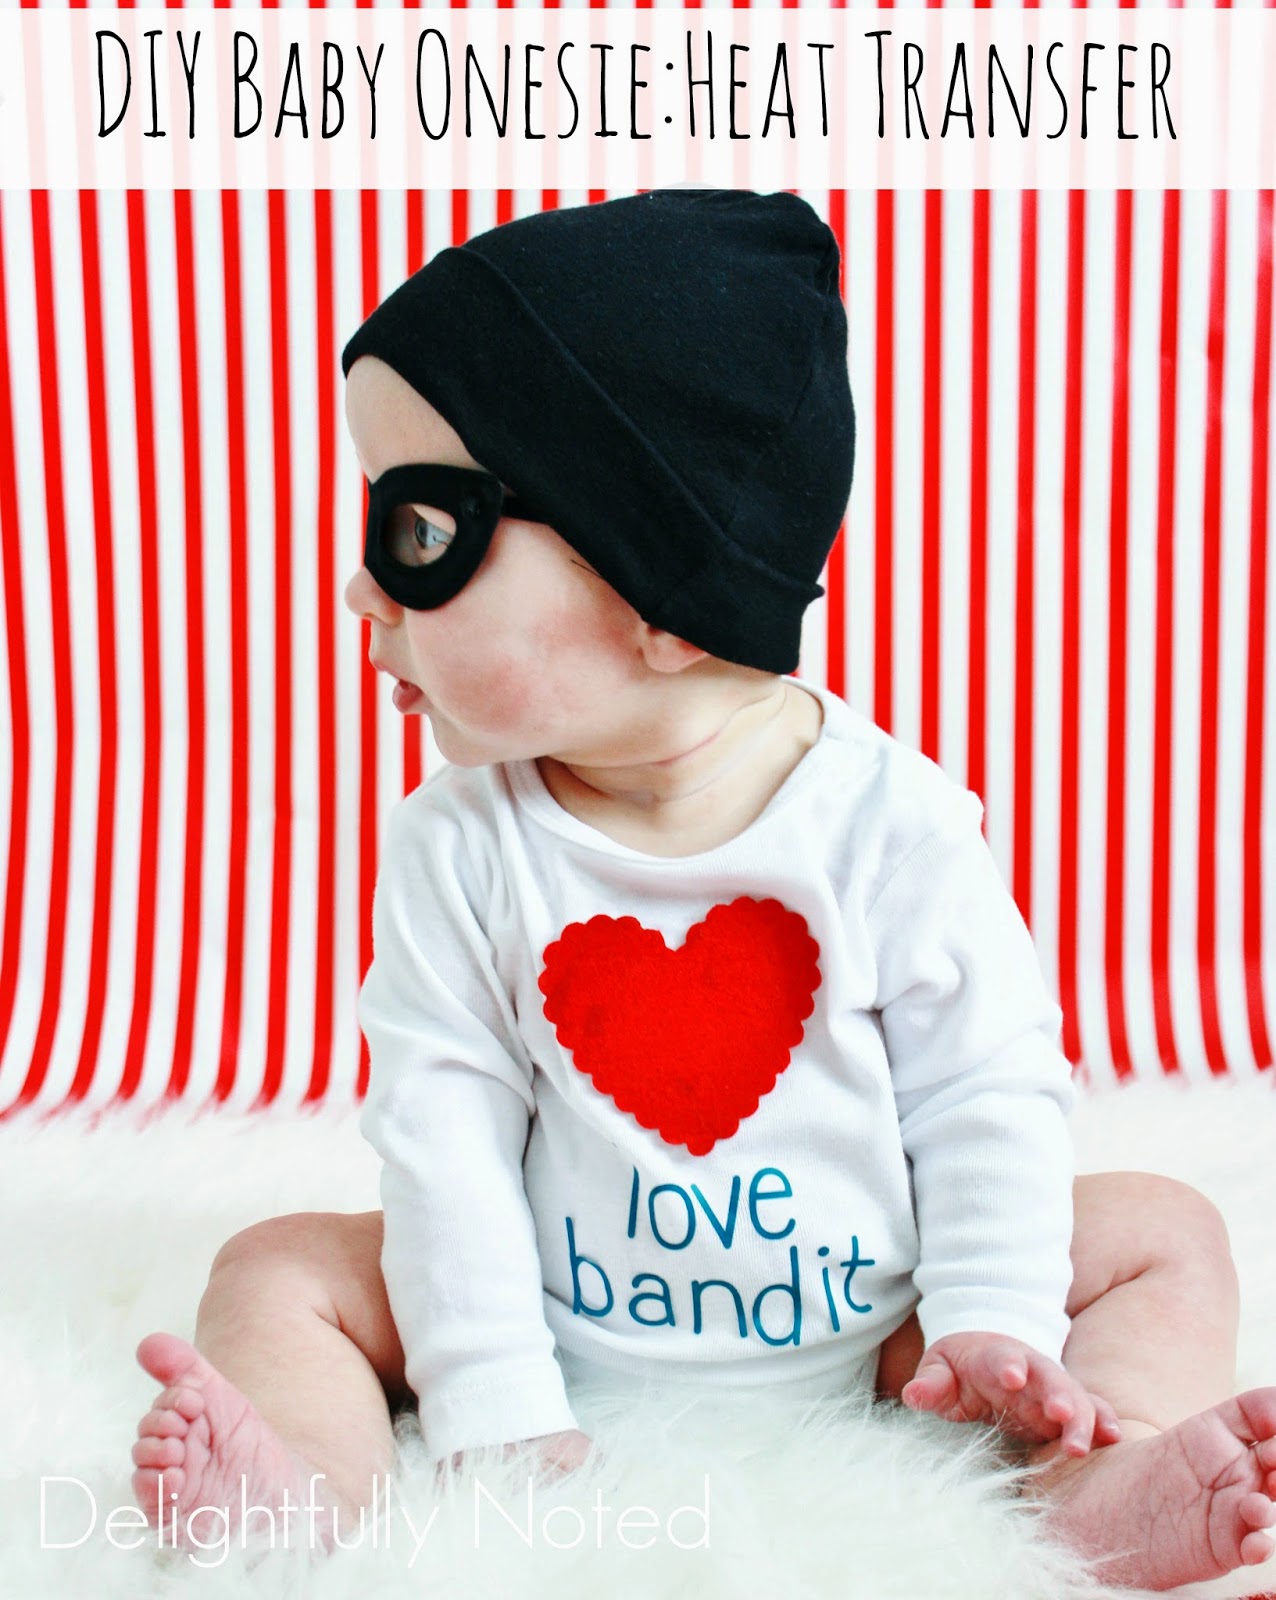 Learn the basics to creating shirts and onesies with heat transfer vinyl! Design this adorable baby onesie for Valentine's Day